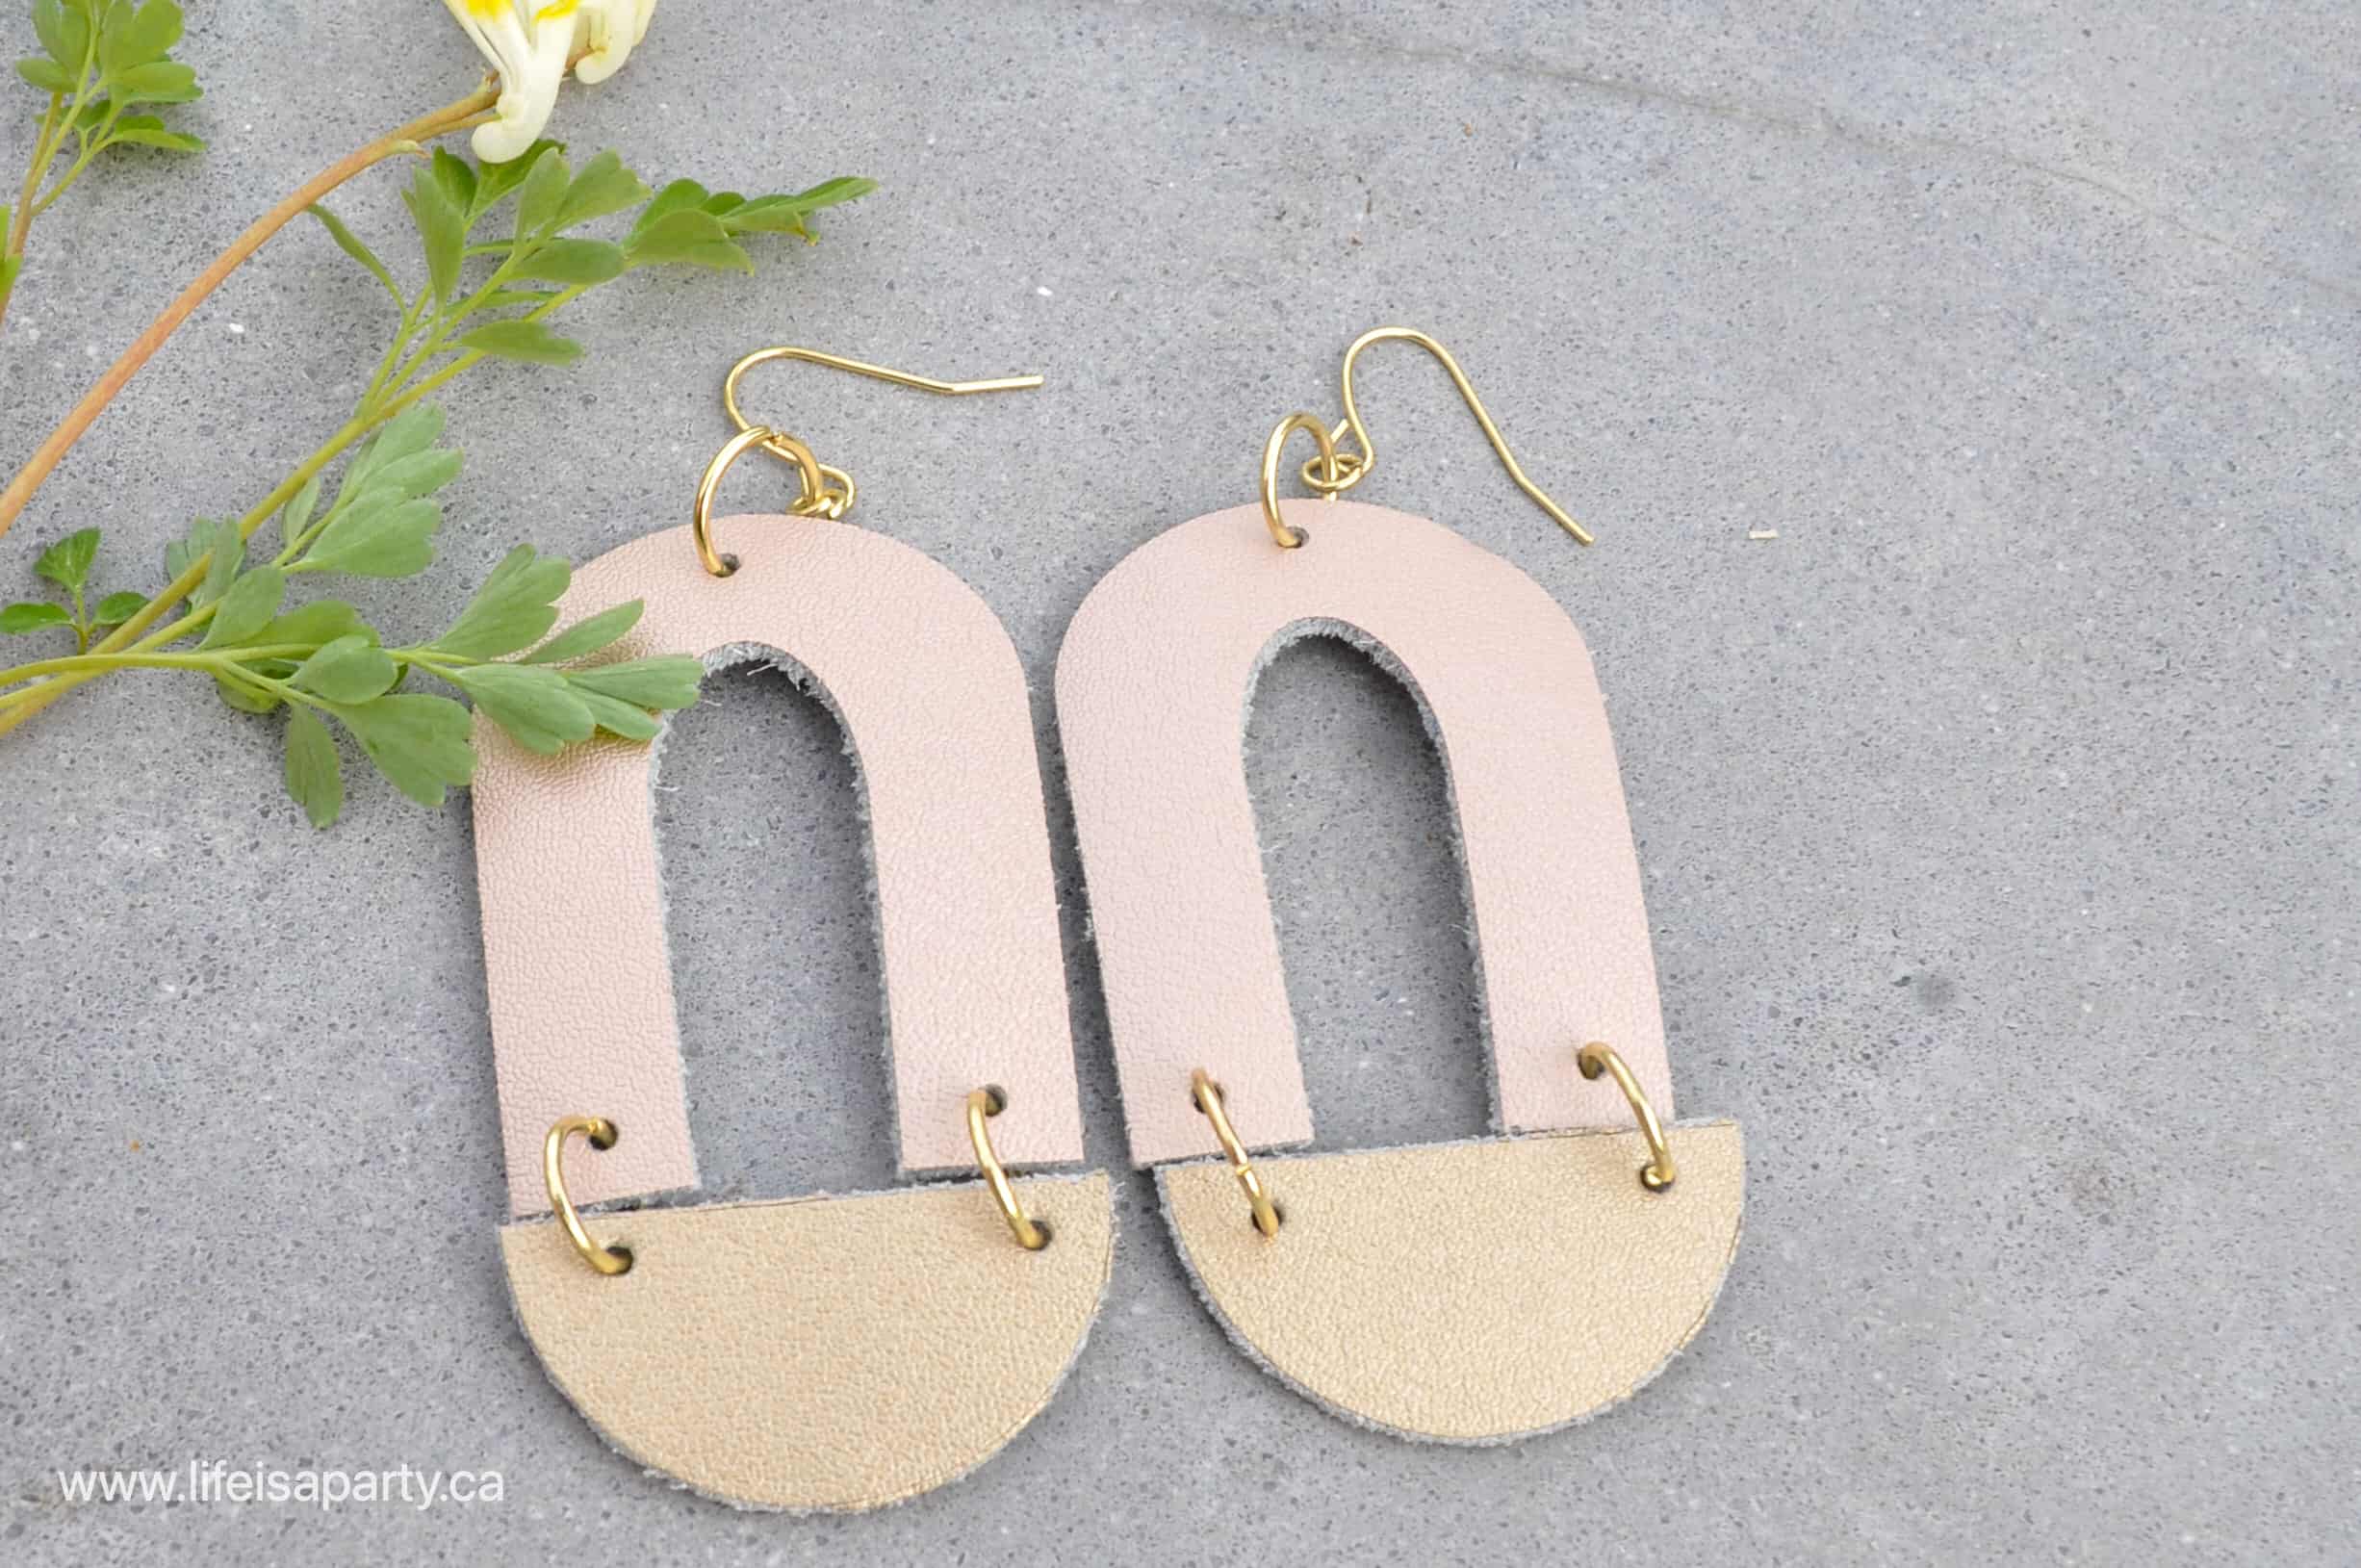 step-by-step guide to Cricut leather earrings